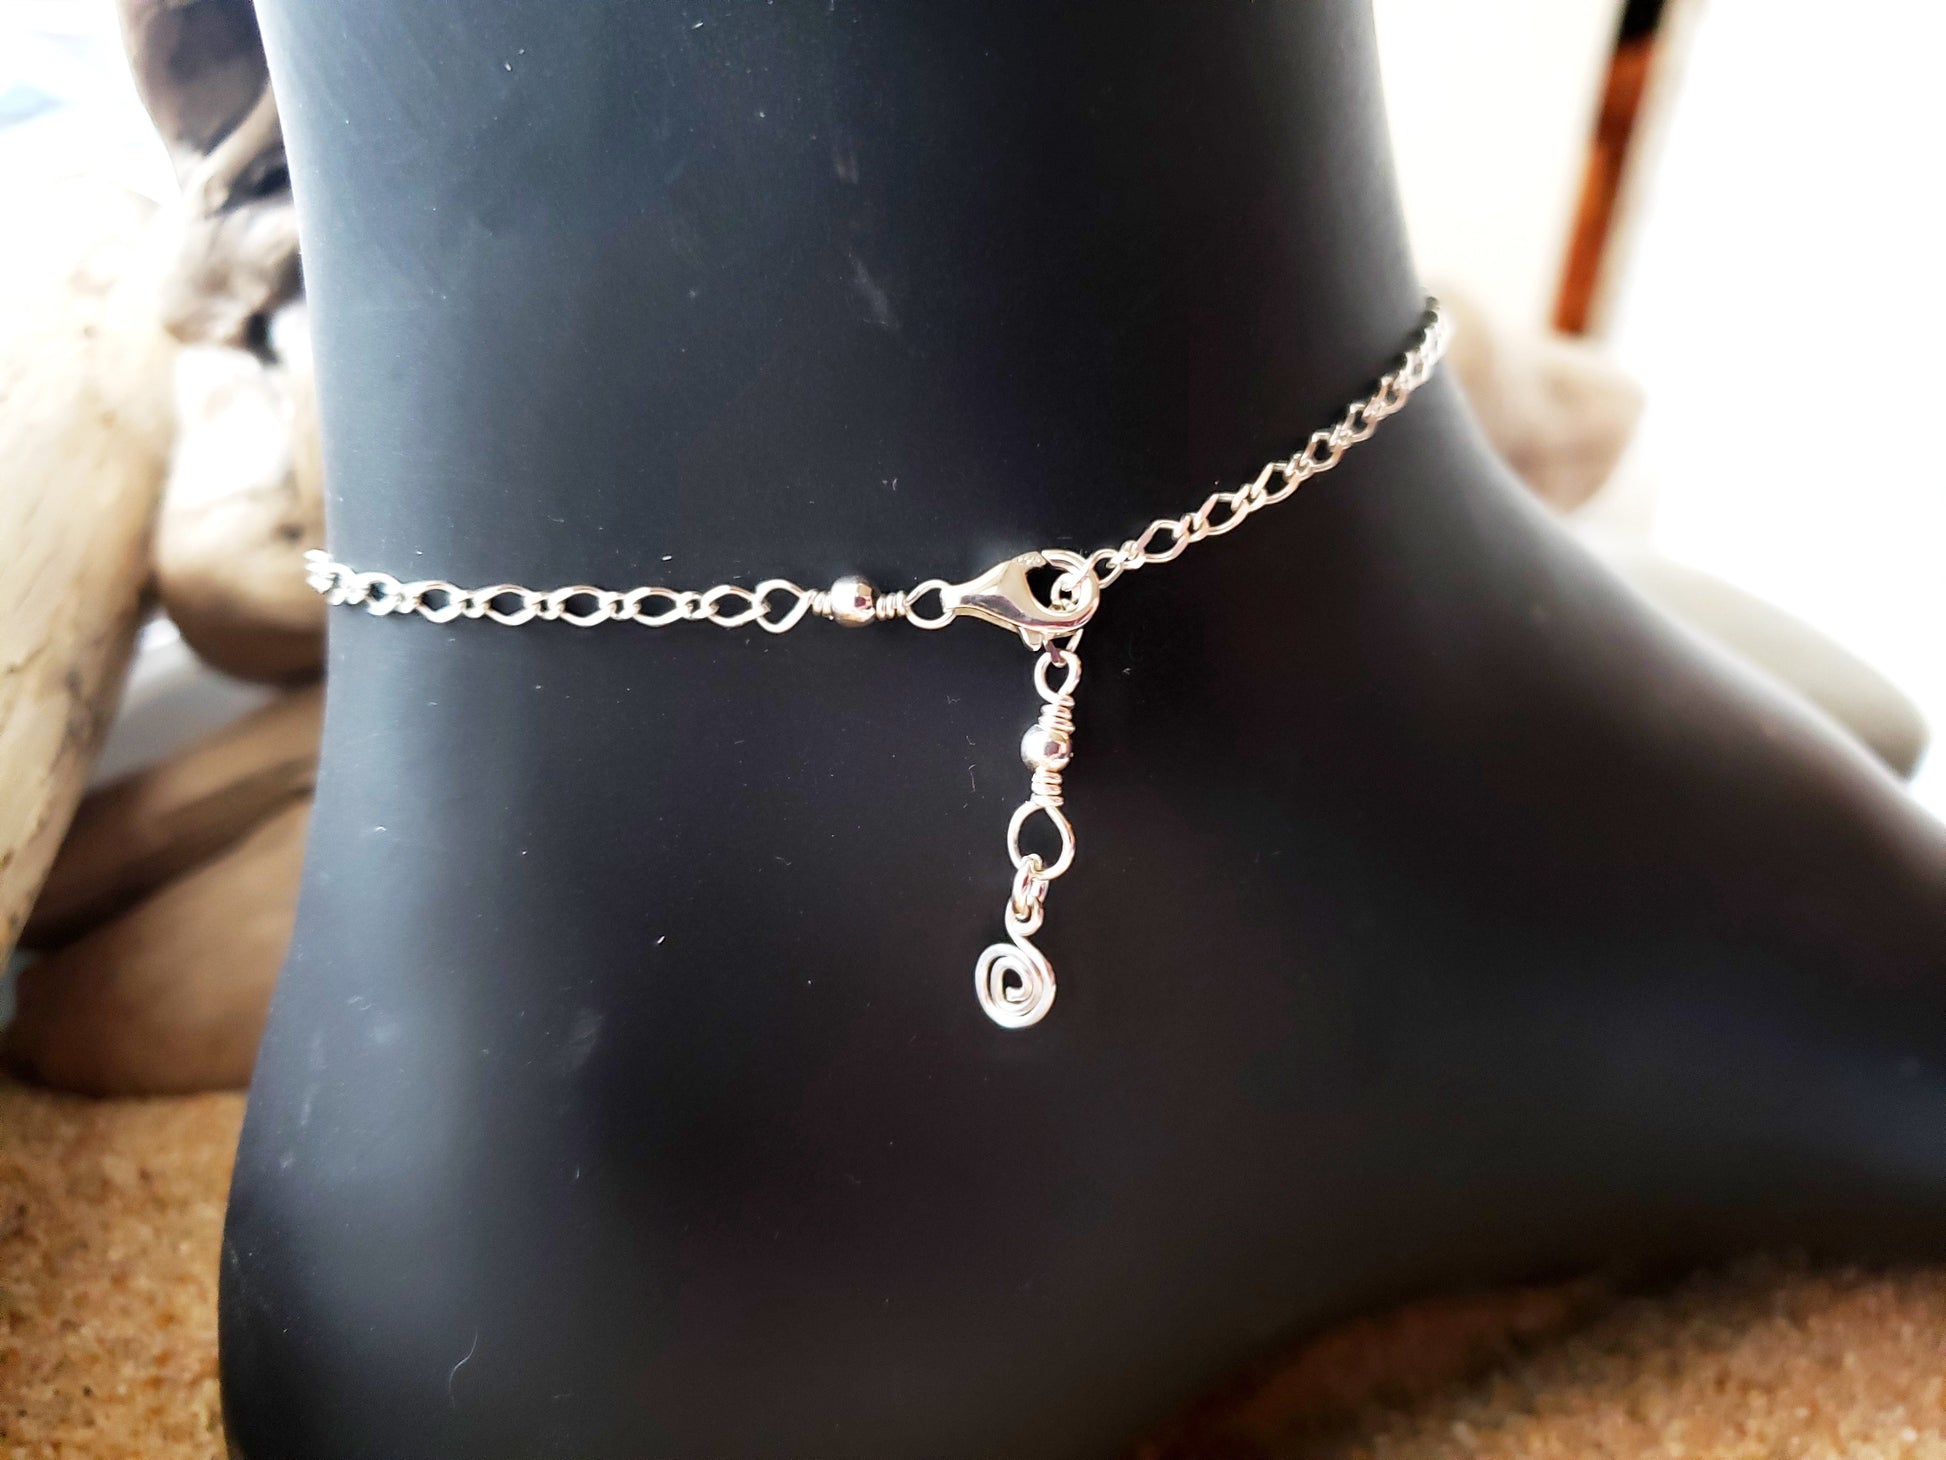 Clasp and Extension Chain with Eternity Coil pendant